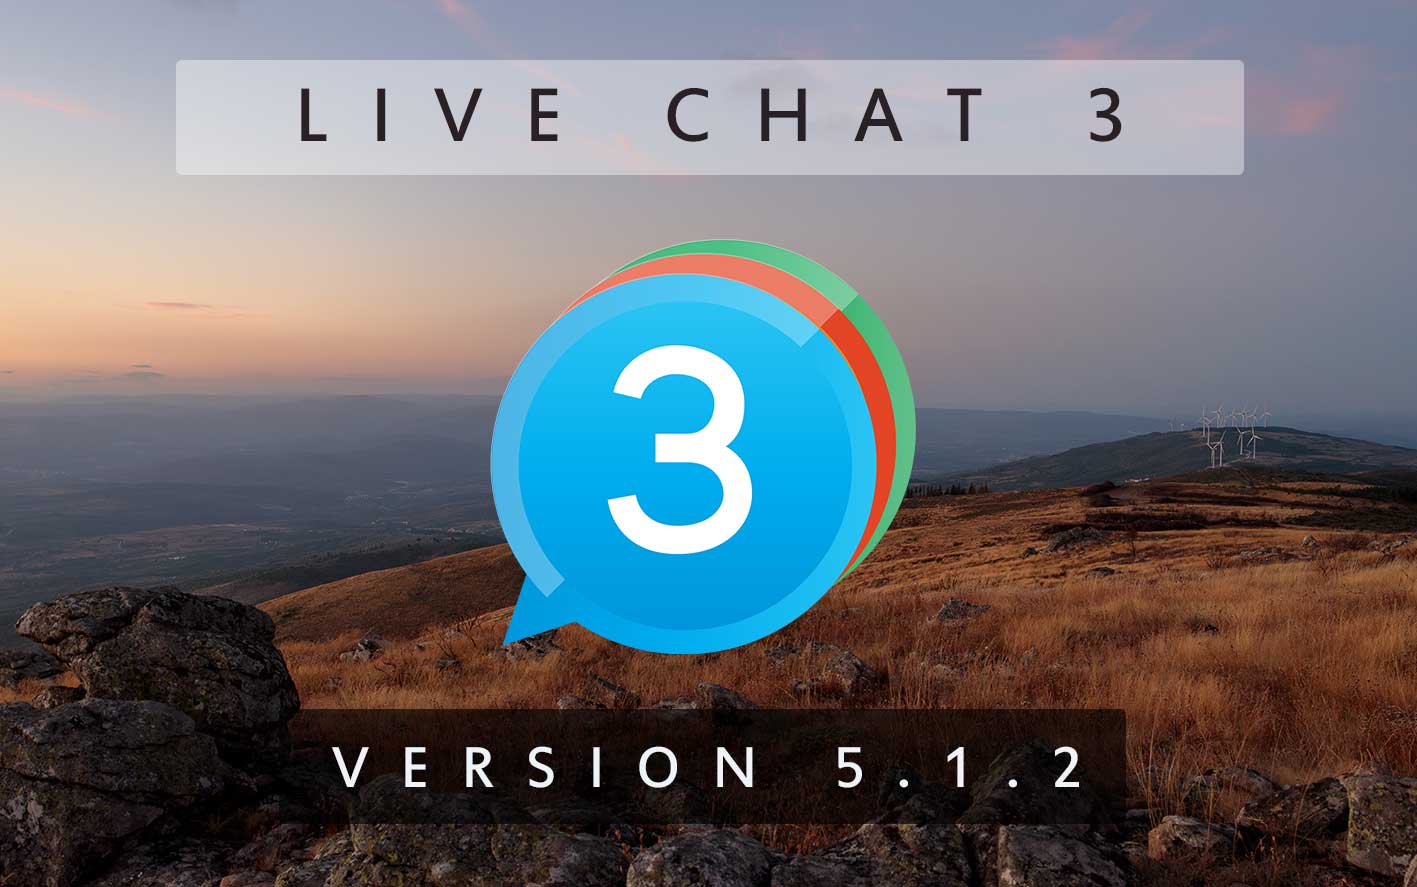 Live Chat 3 - Version 5.1.2